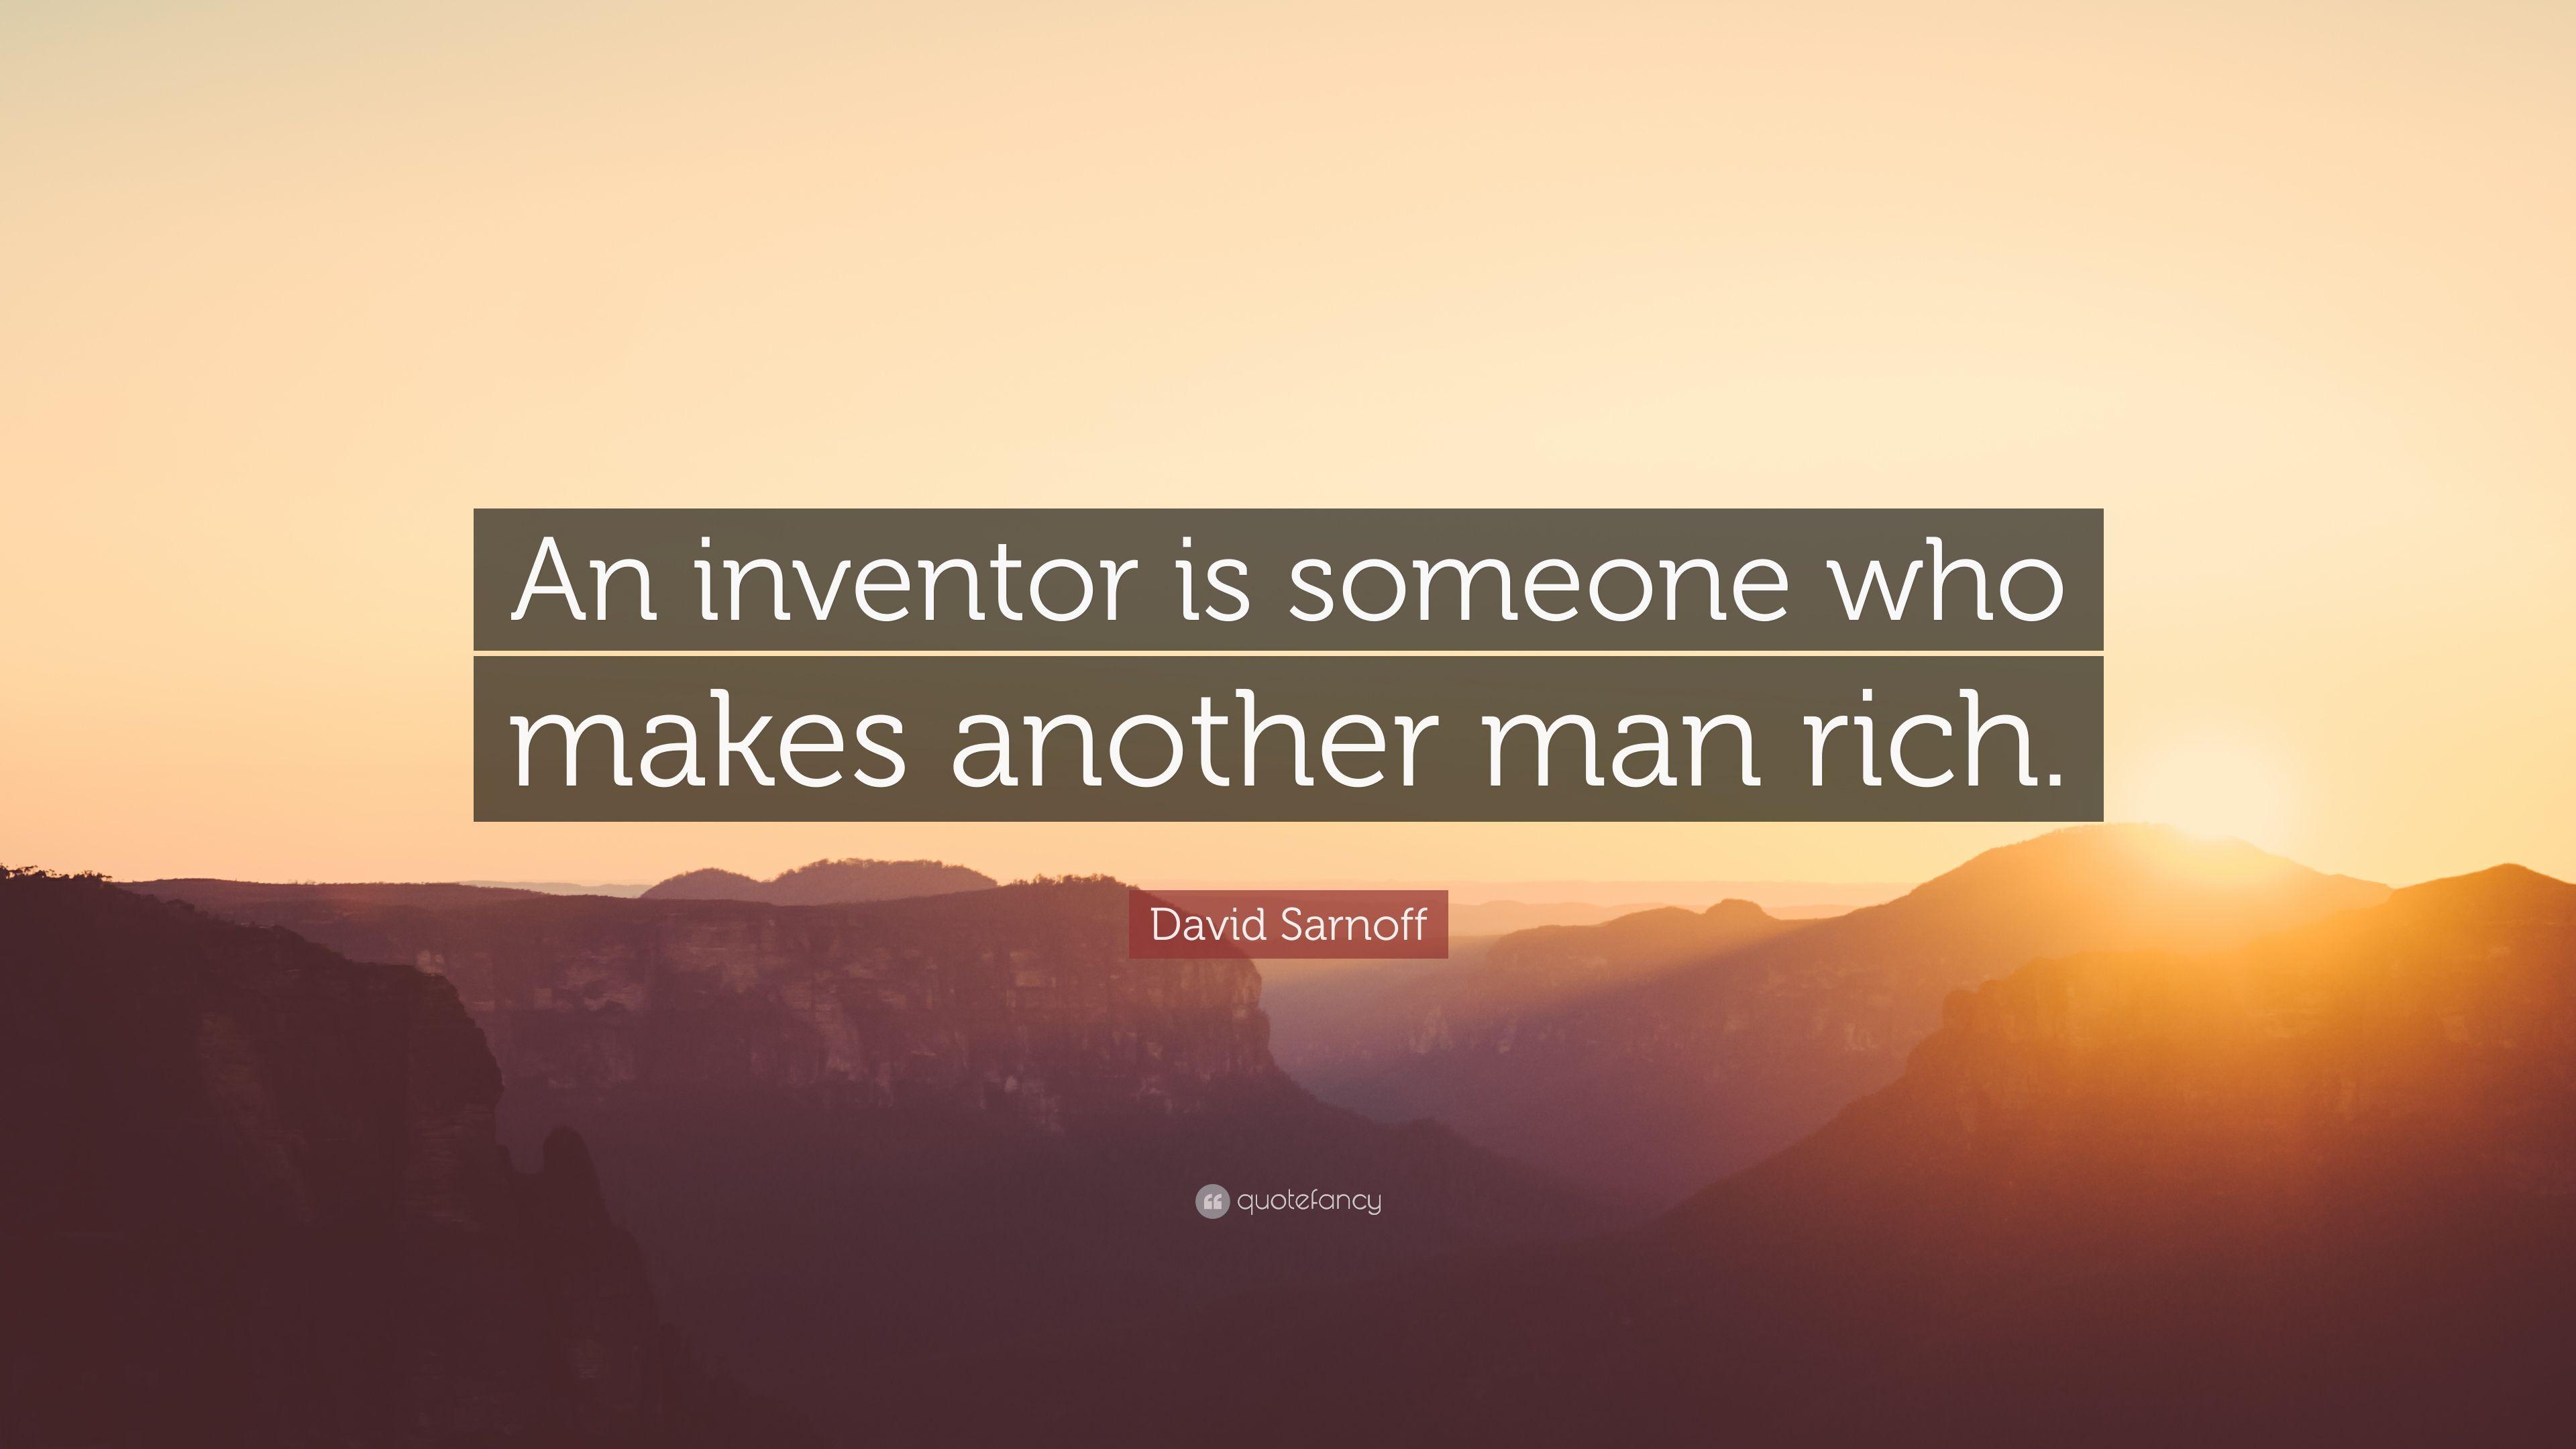 David Sarnoff Quote: “An inventor is someone who makes another man